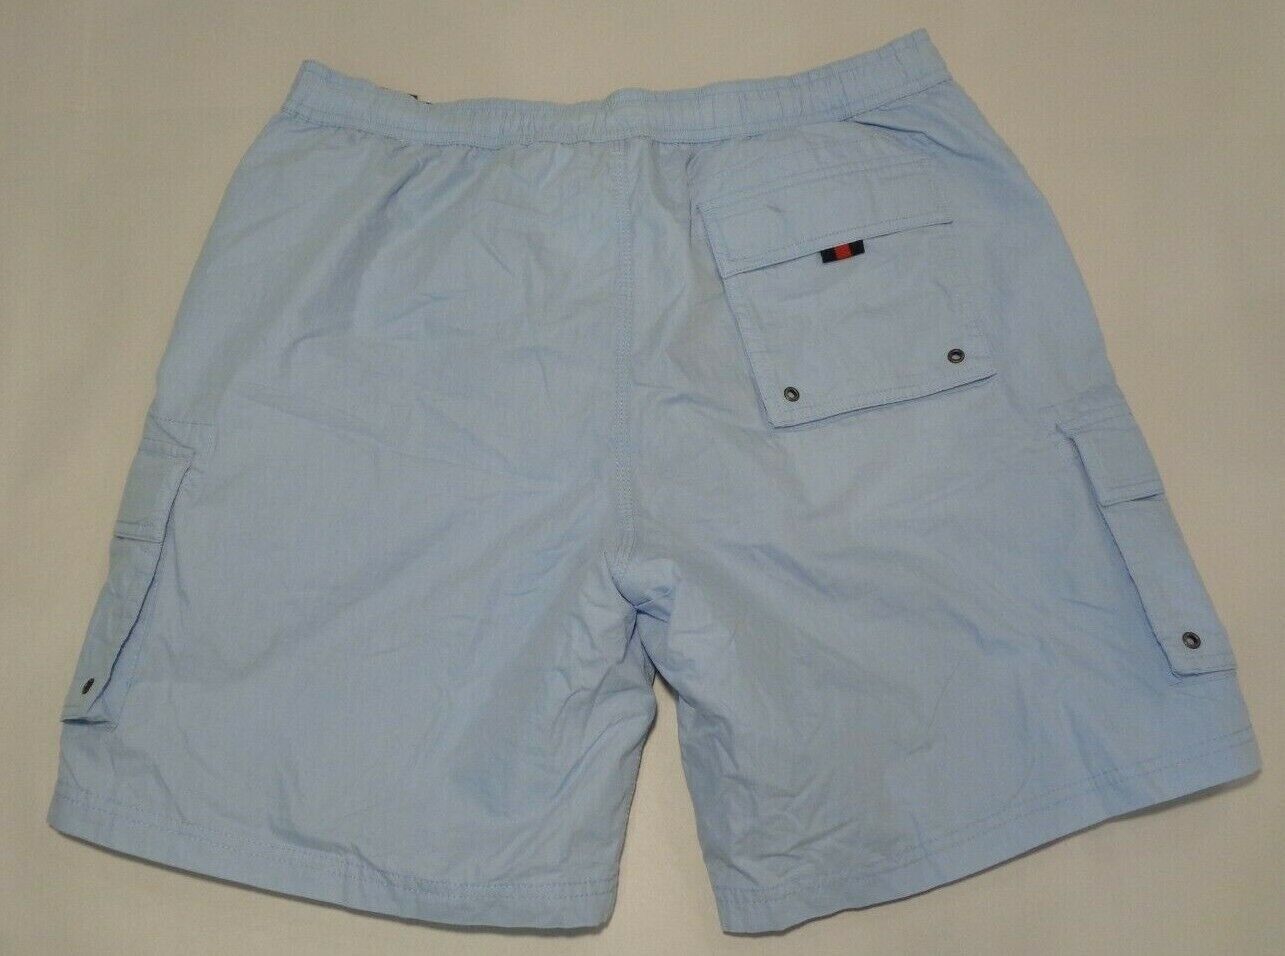 Primary image for Cremieux Size Large Blue New Men's Cargo Swim Trunks Board Shorts